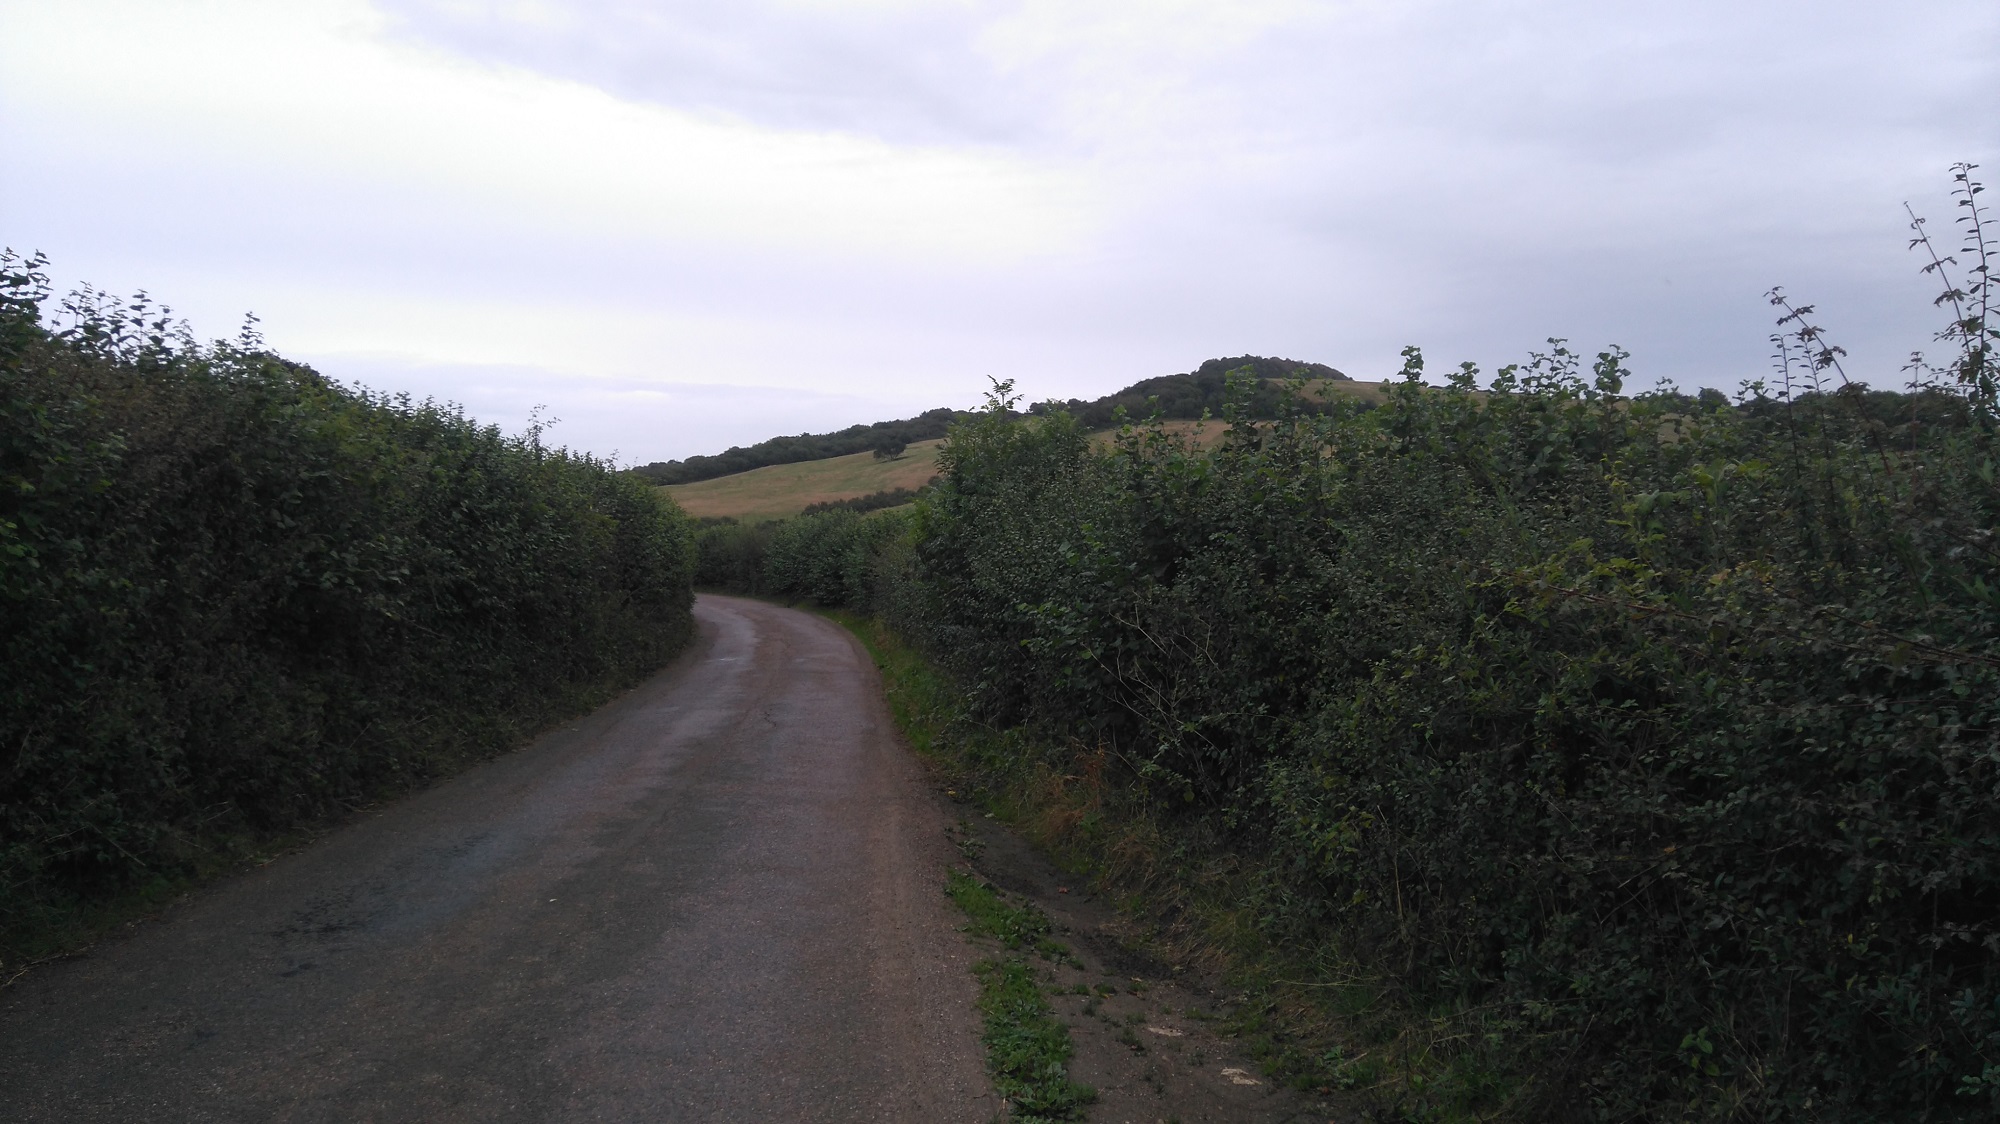 A tarmac country lane flanked by hedgerows on a cloudy summer day with a hill in the background